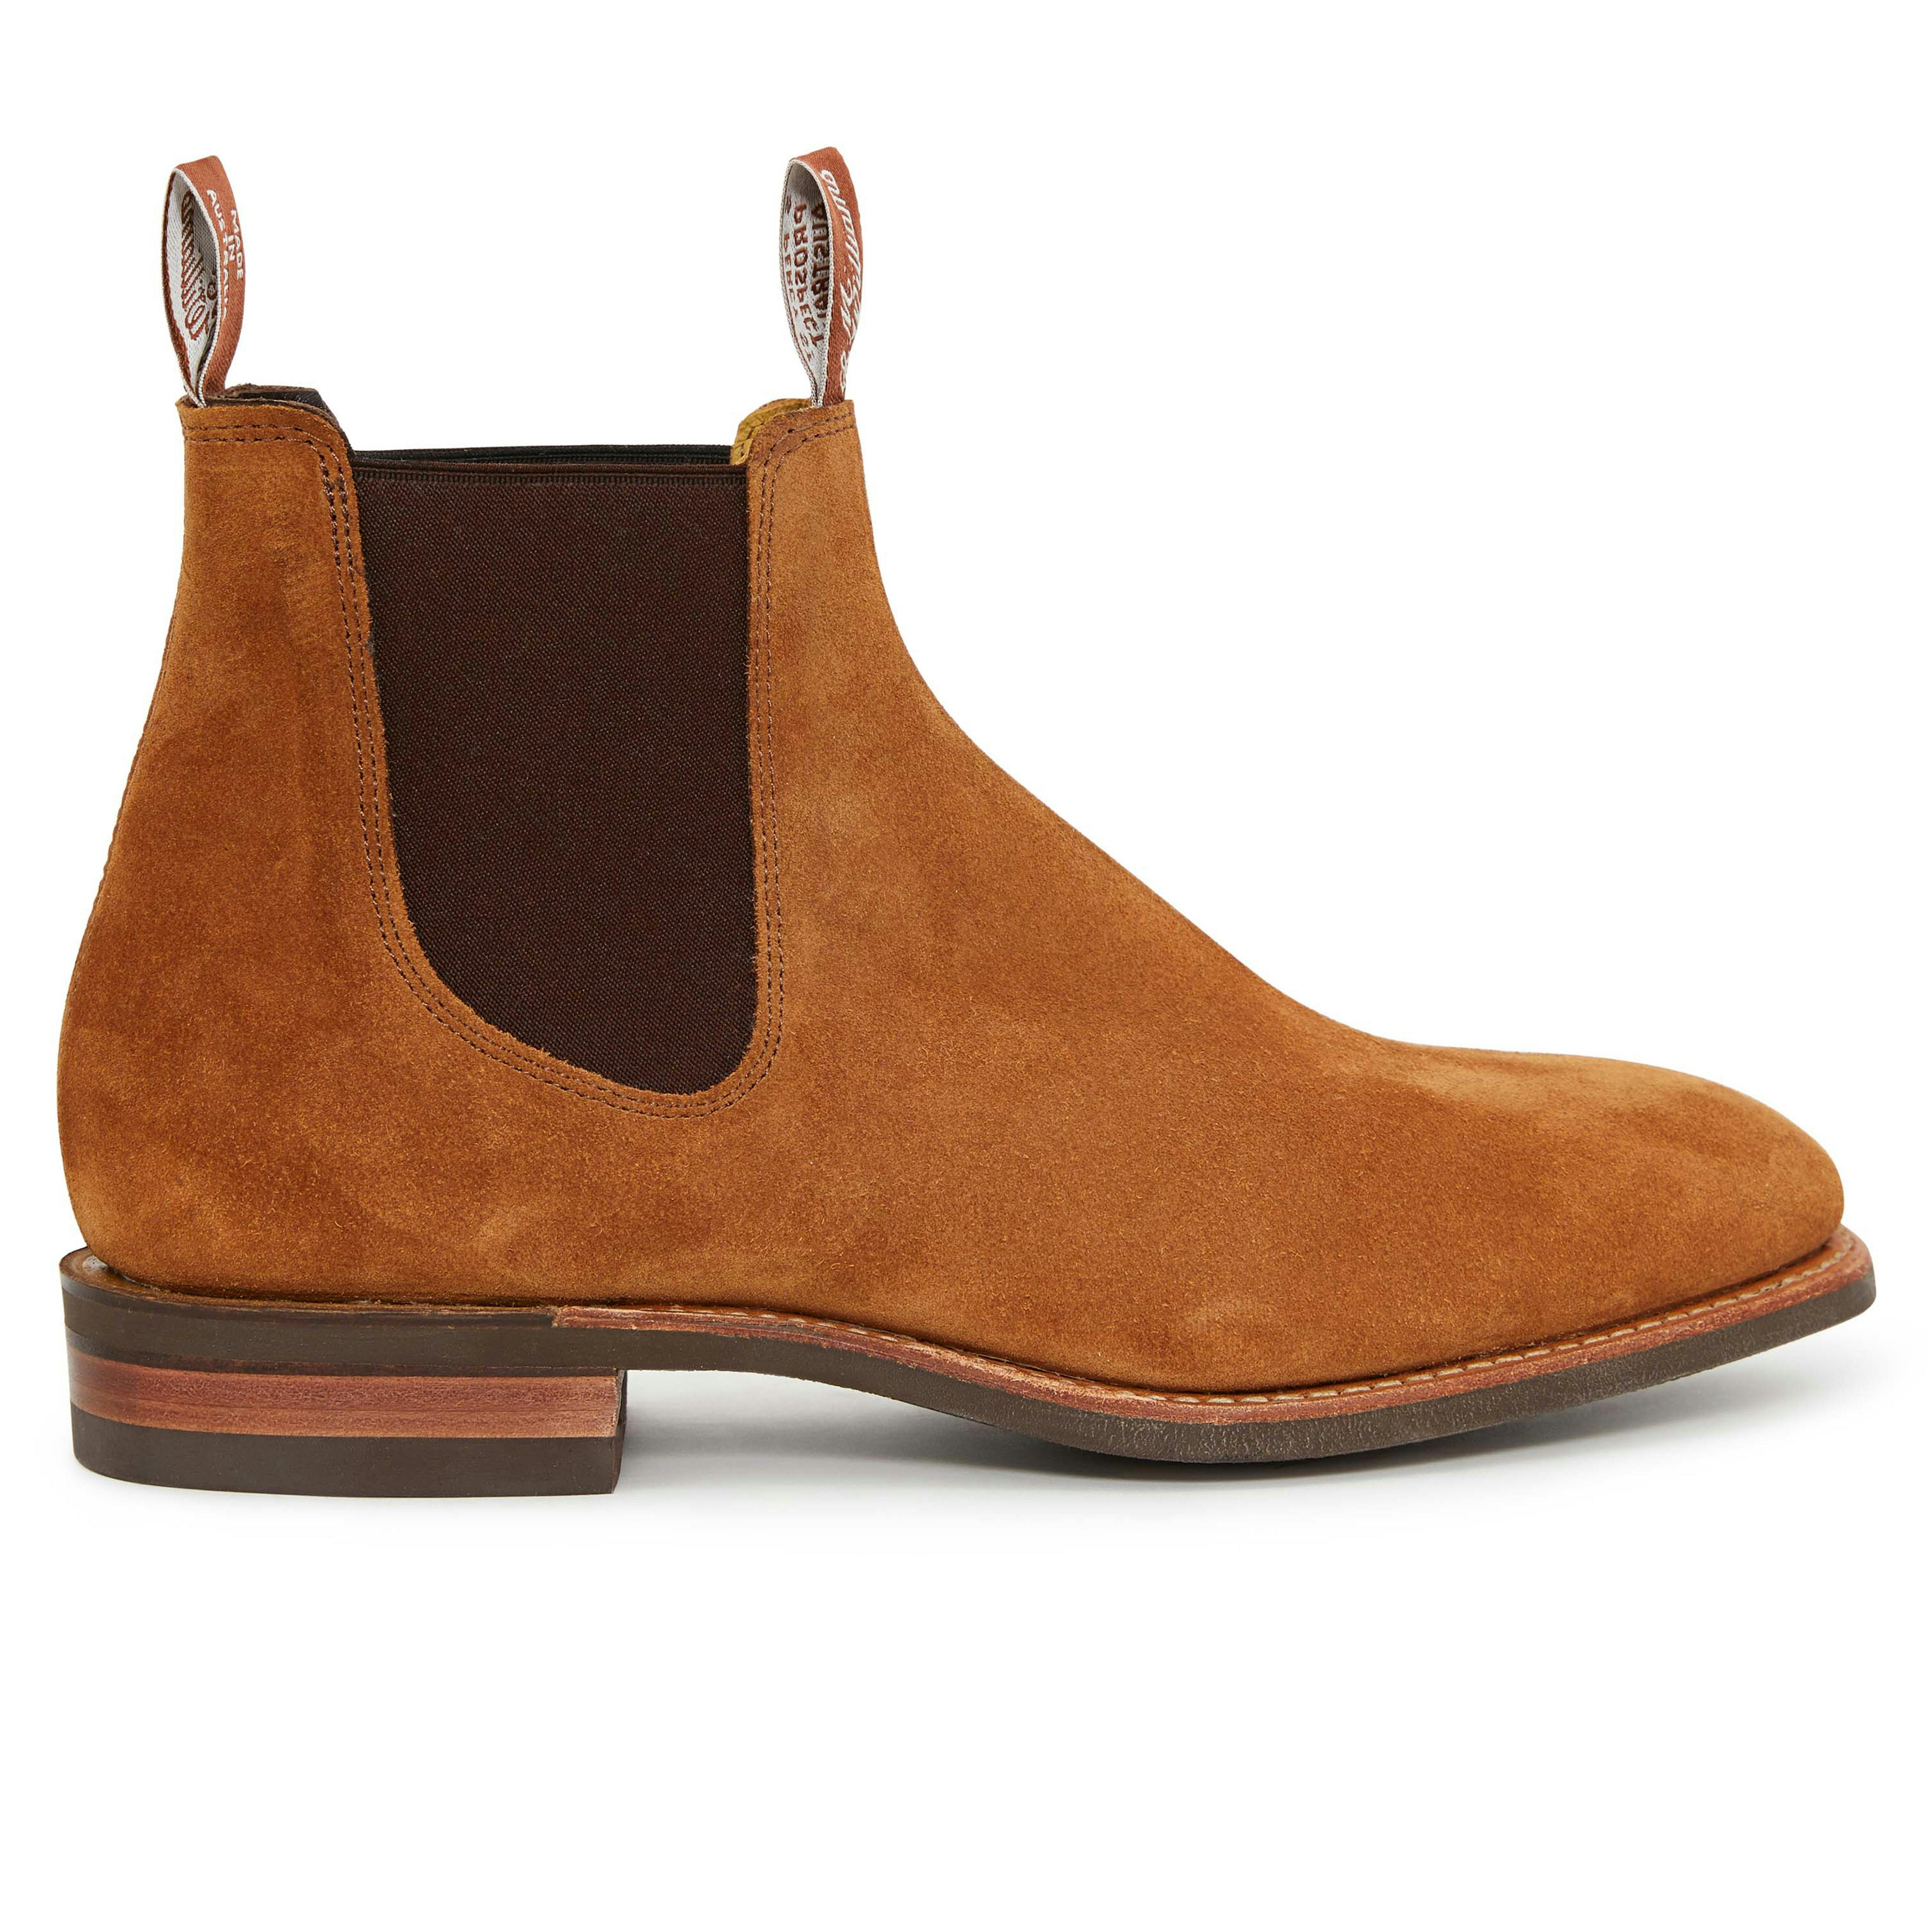 Buy Men's R.M. Williams Boots Online, FREE SHIPPING